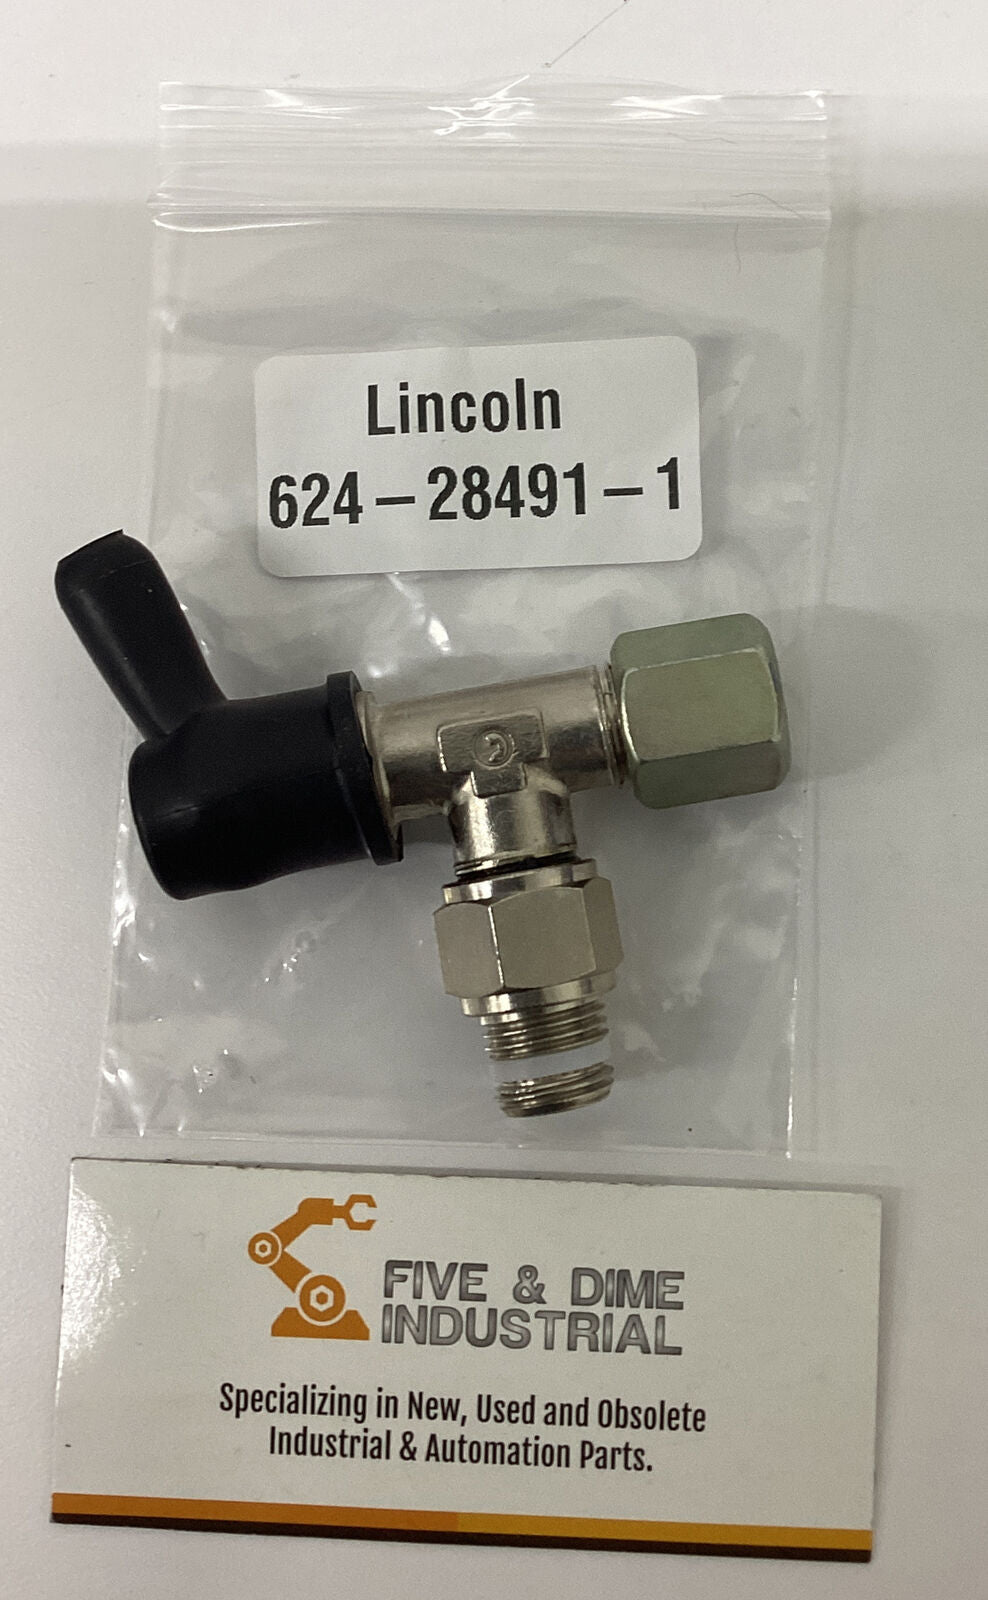 Lincoln 624-28491-1 Safety Relief Valve (YE238)